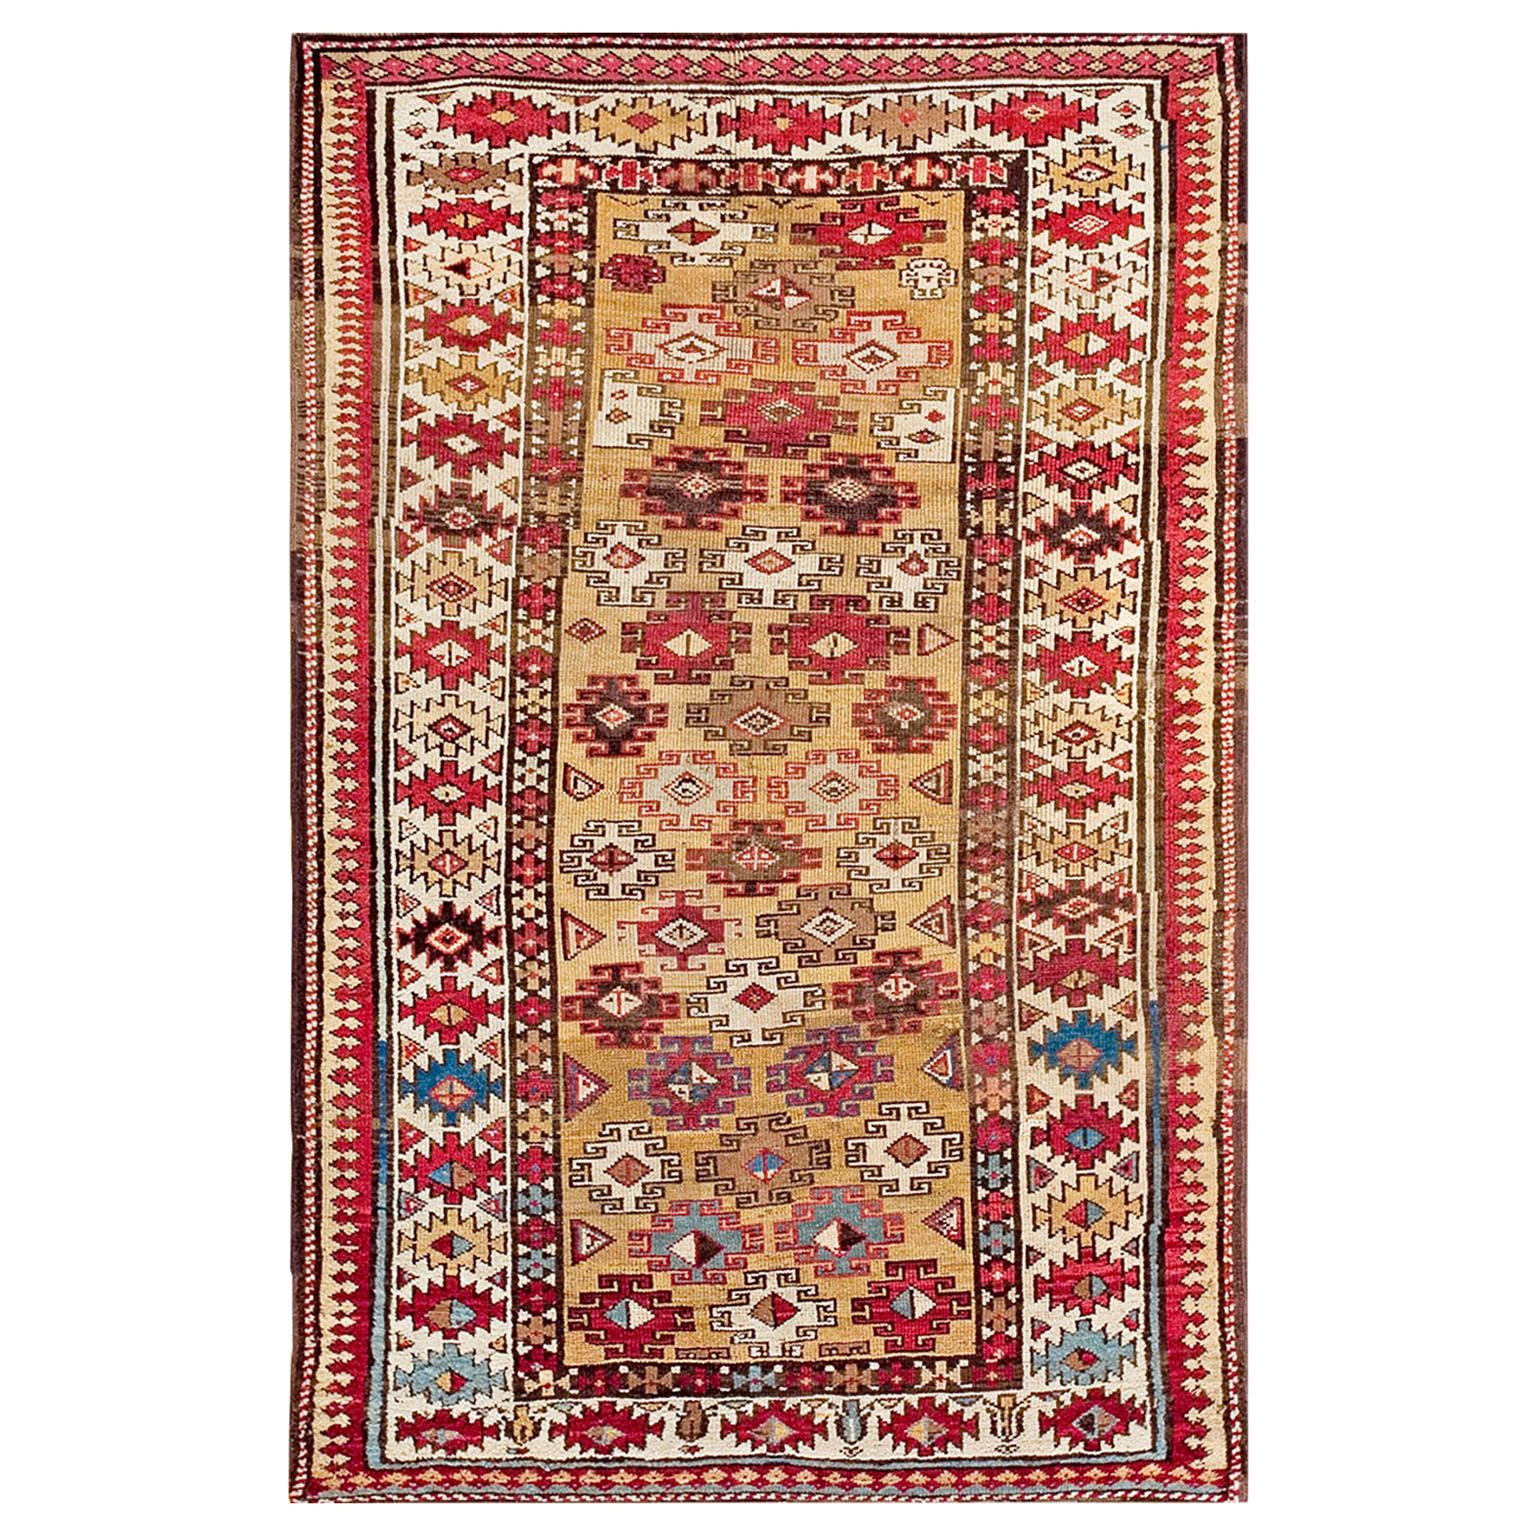 Early 20th Century S. Caucasian Moghan Carpet ( 3'6" x 5'7" - 107 x 170 ) For Sale